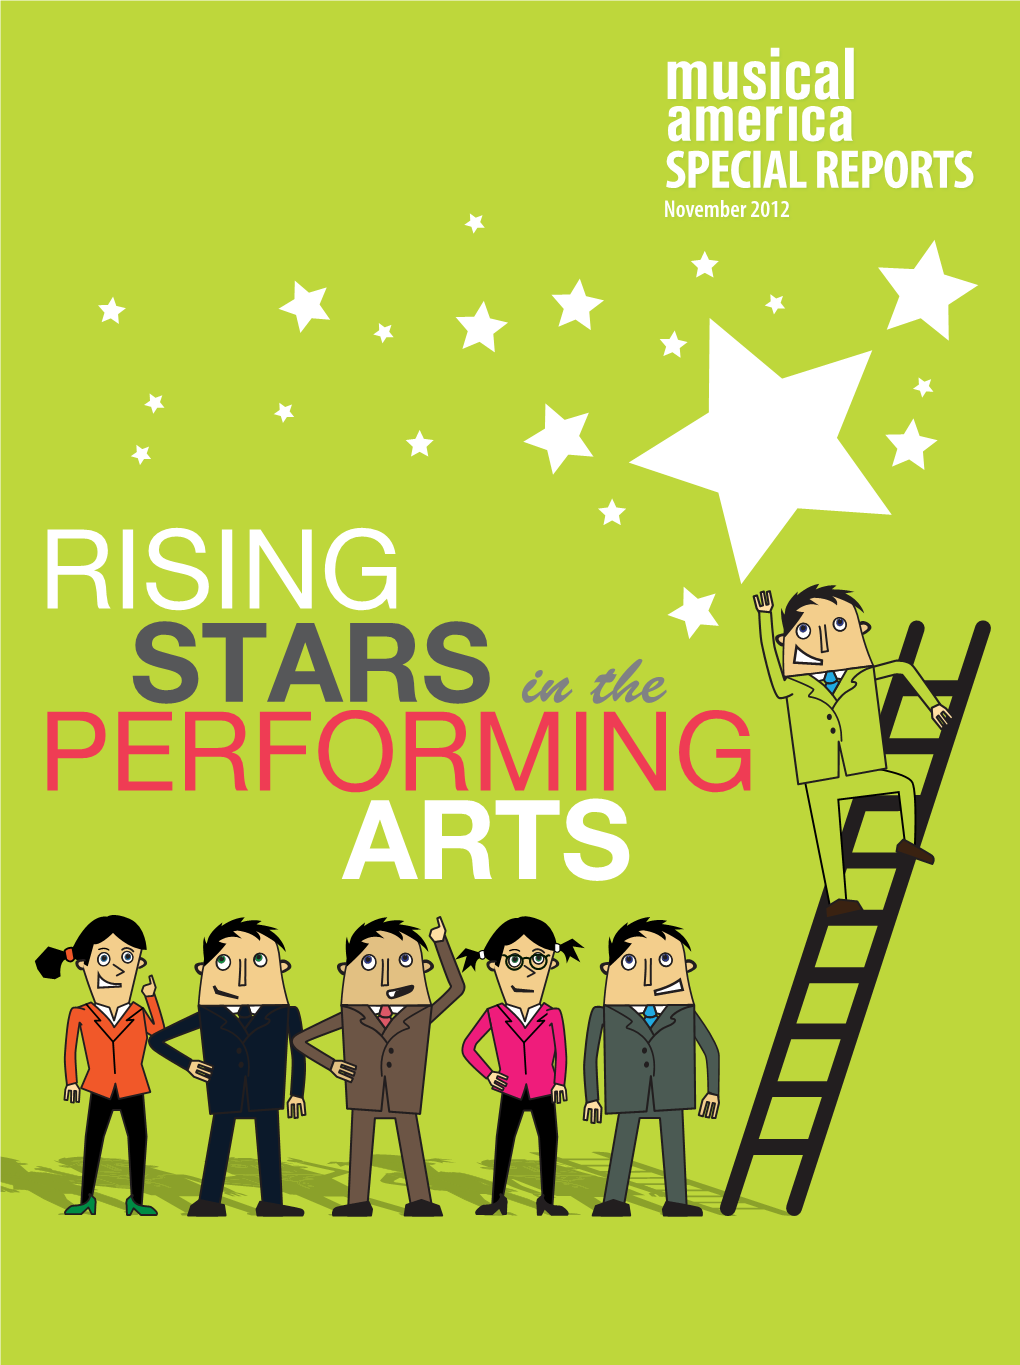 RISING STARS in the PERFORMING ARTS